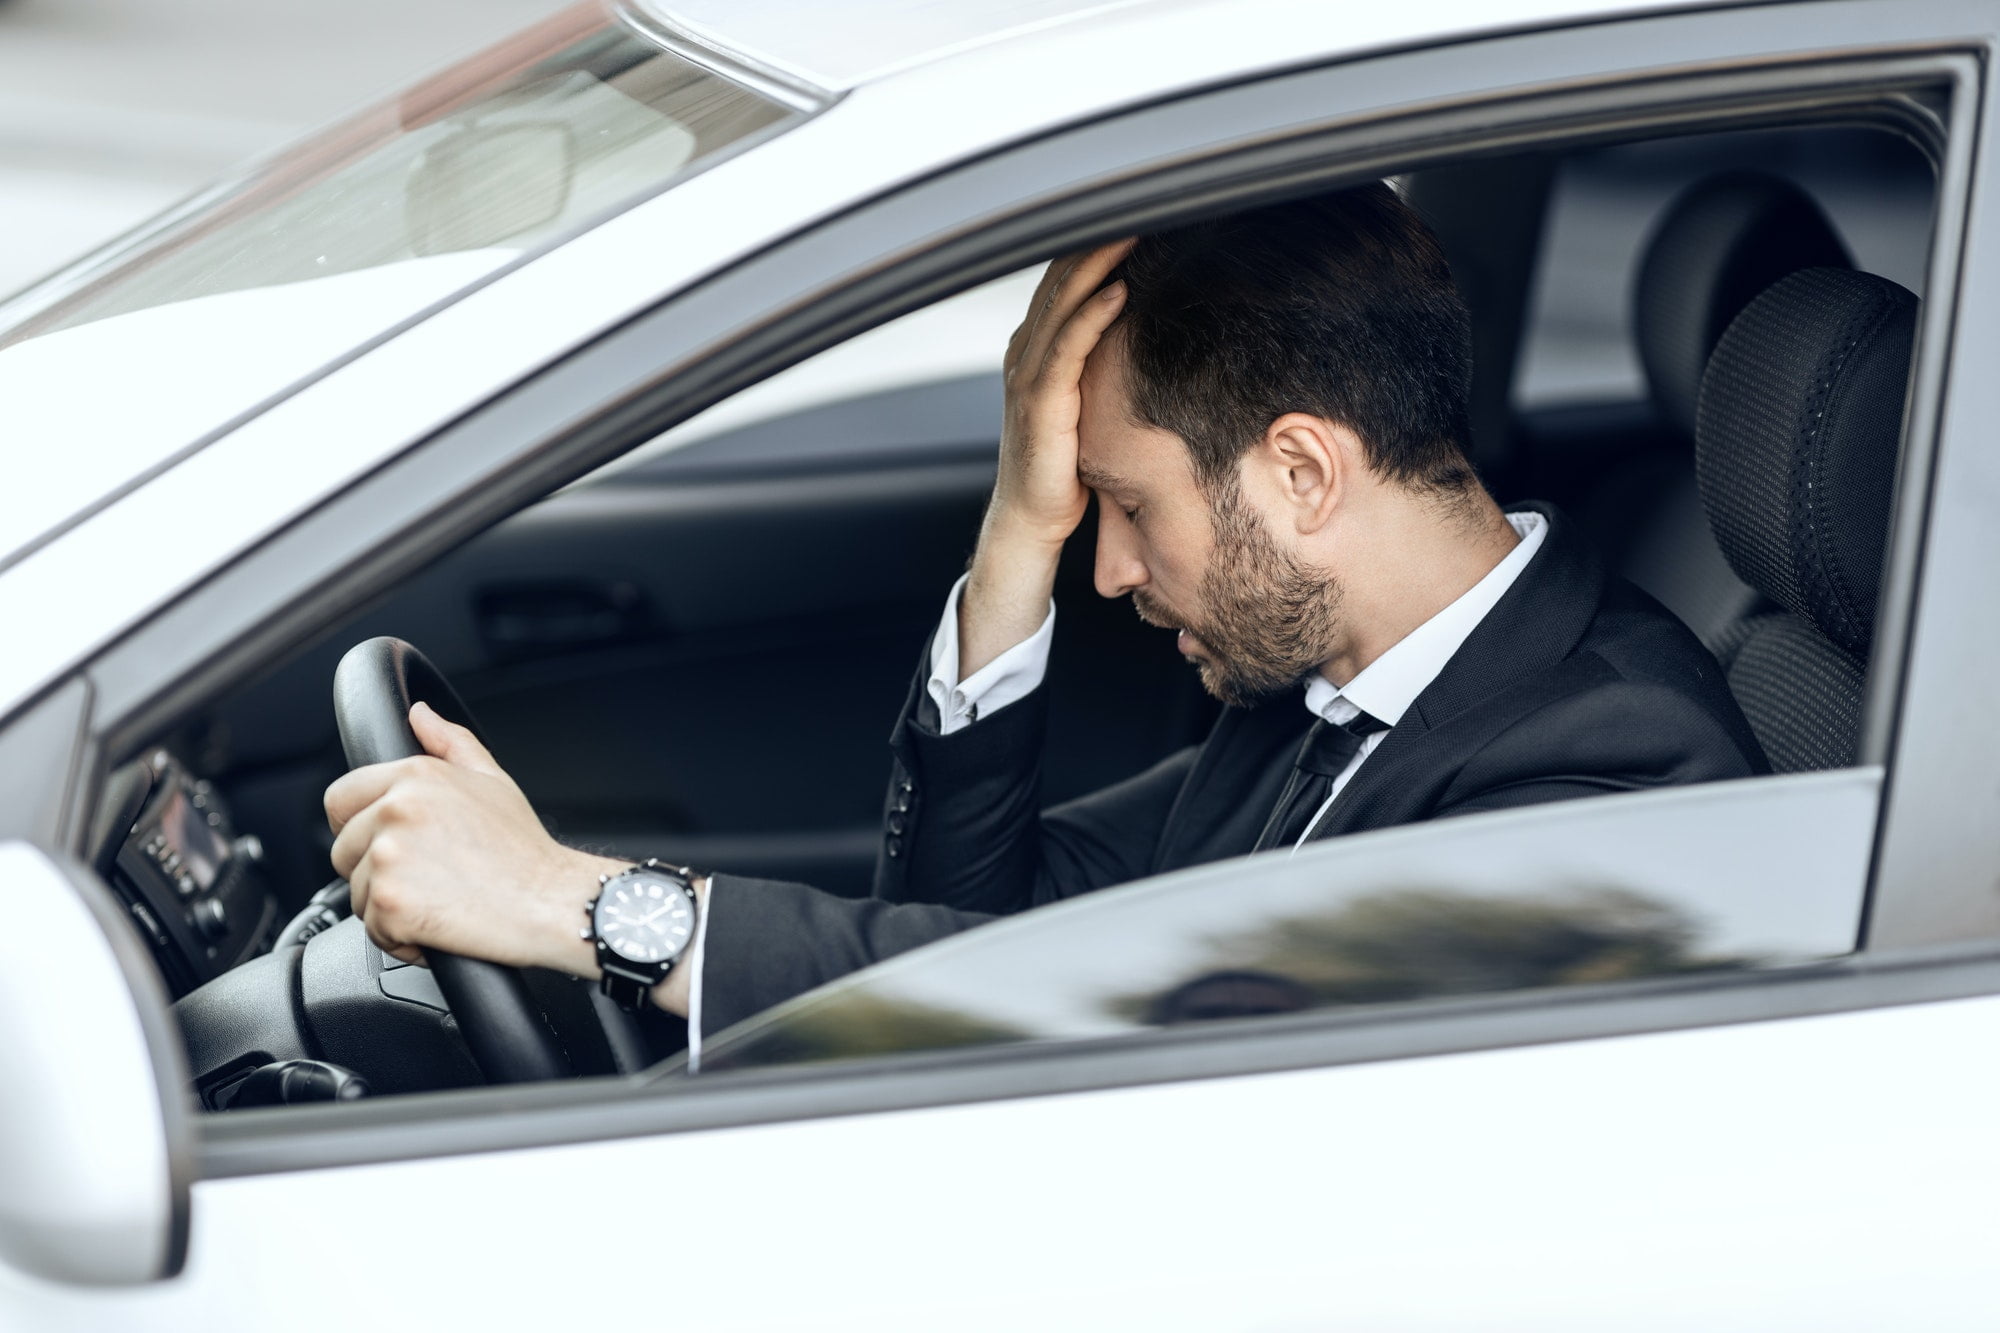 Stressed businessman stuck in traffic, late to airport